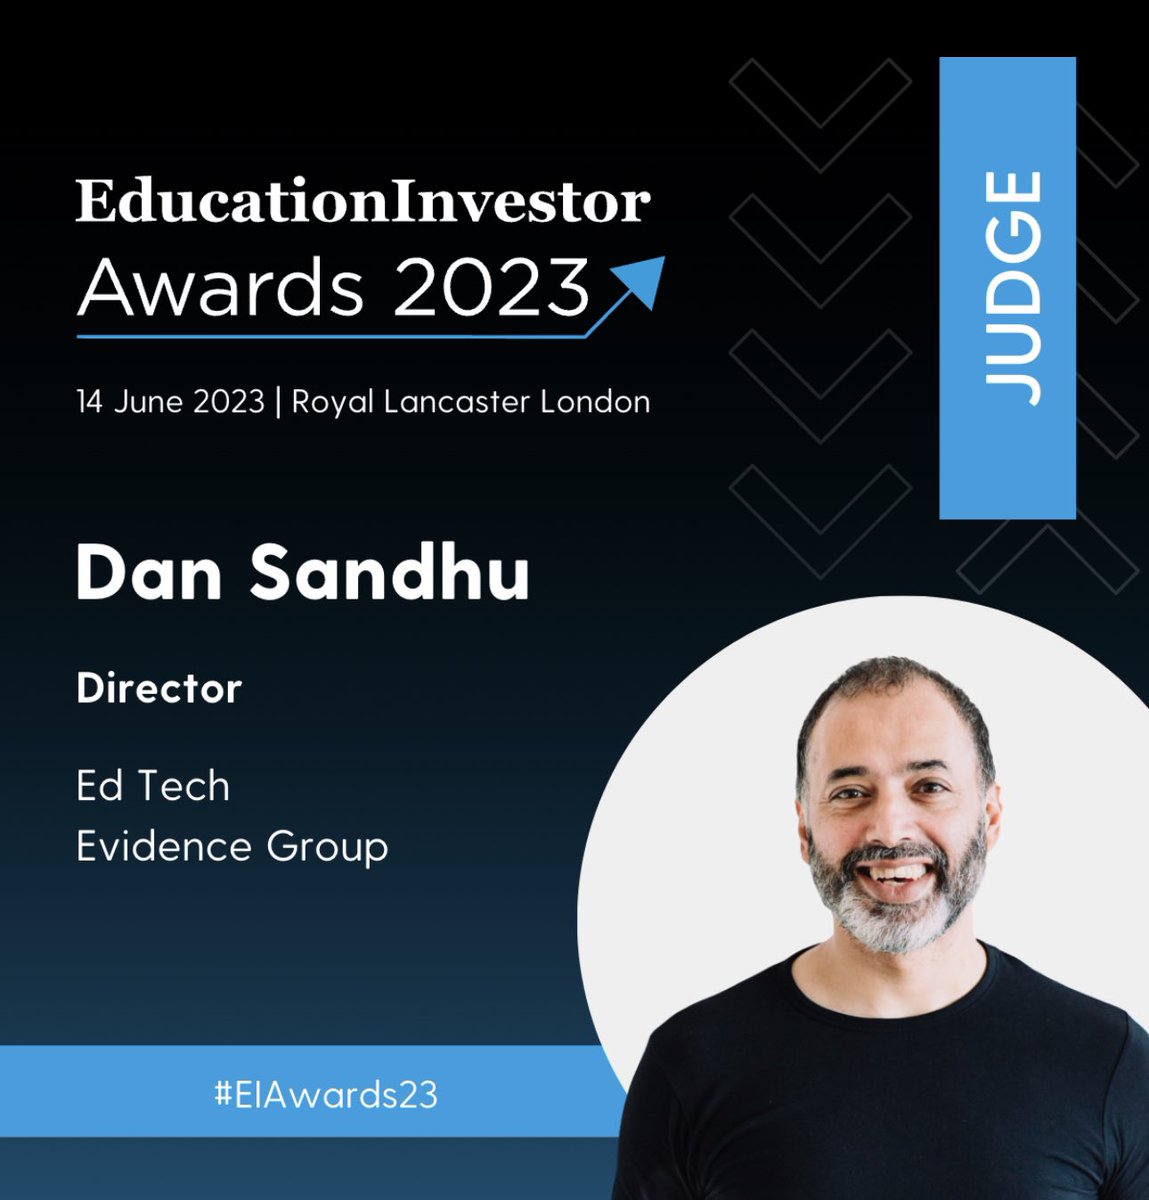 I am delighted to be a judge for this year's #EIAwards23. Looking forward to celebrating with you all and recognising some of the best in the industry.